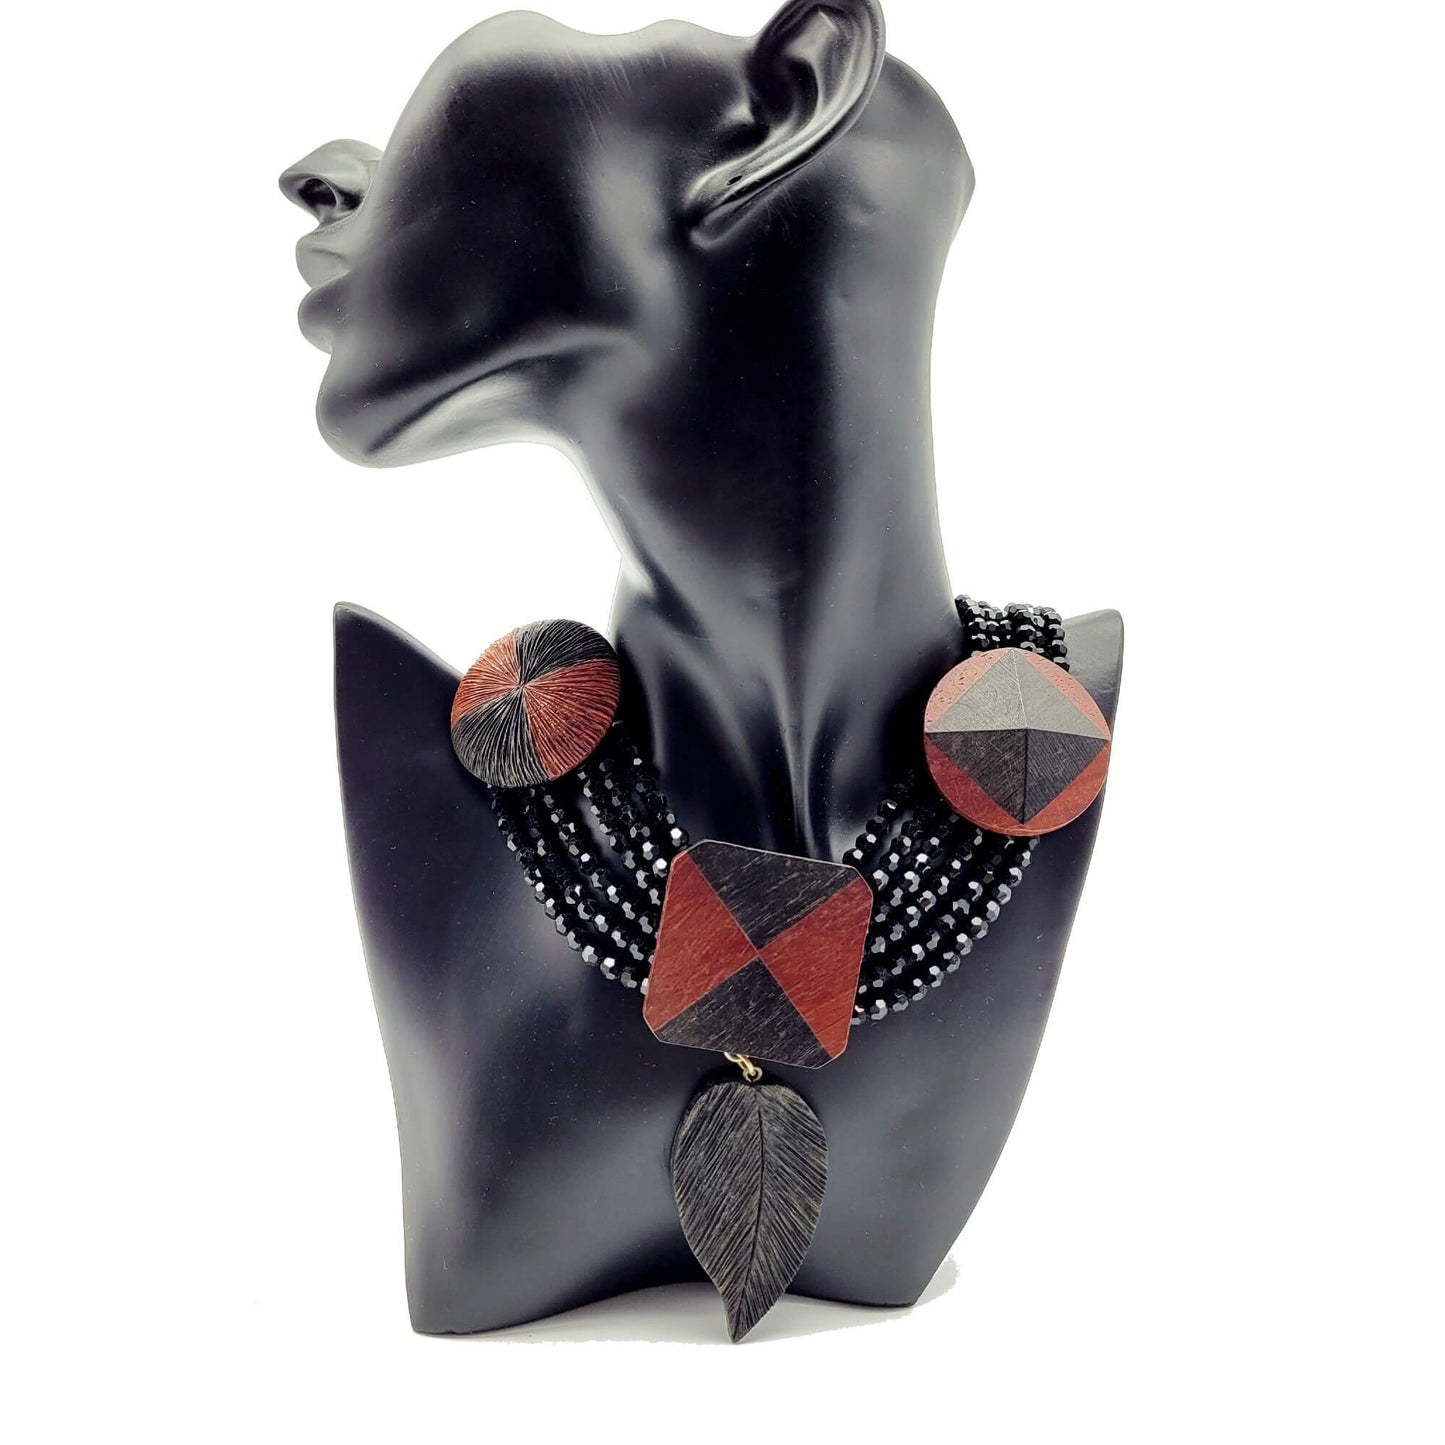 A necklace features 6 strands of black beads, with a leaf shape pendant and 3 big charms